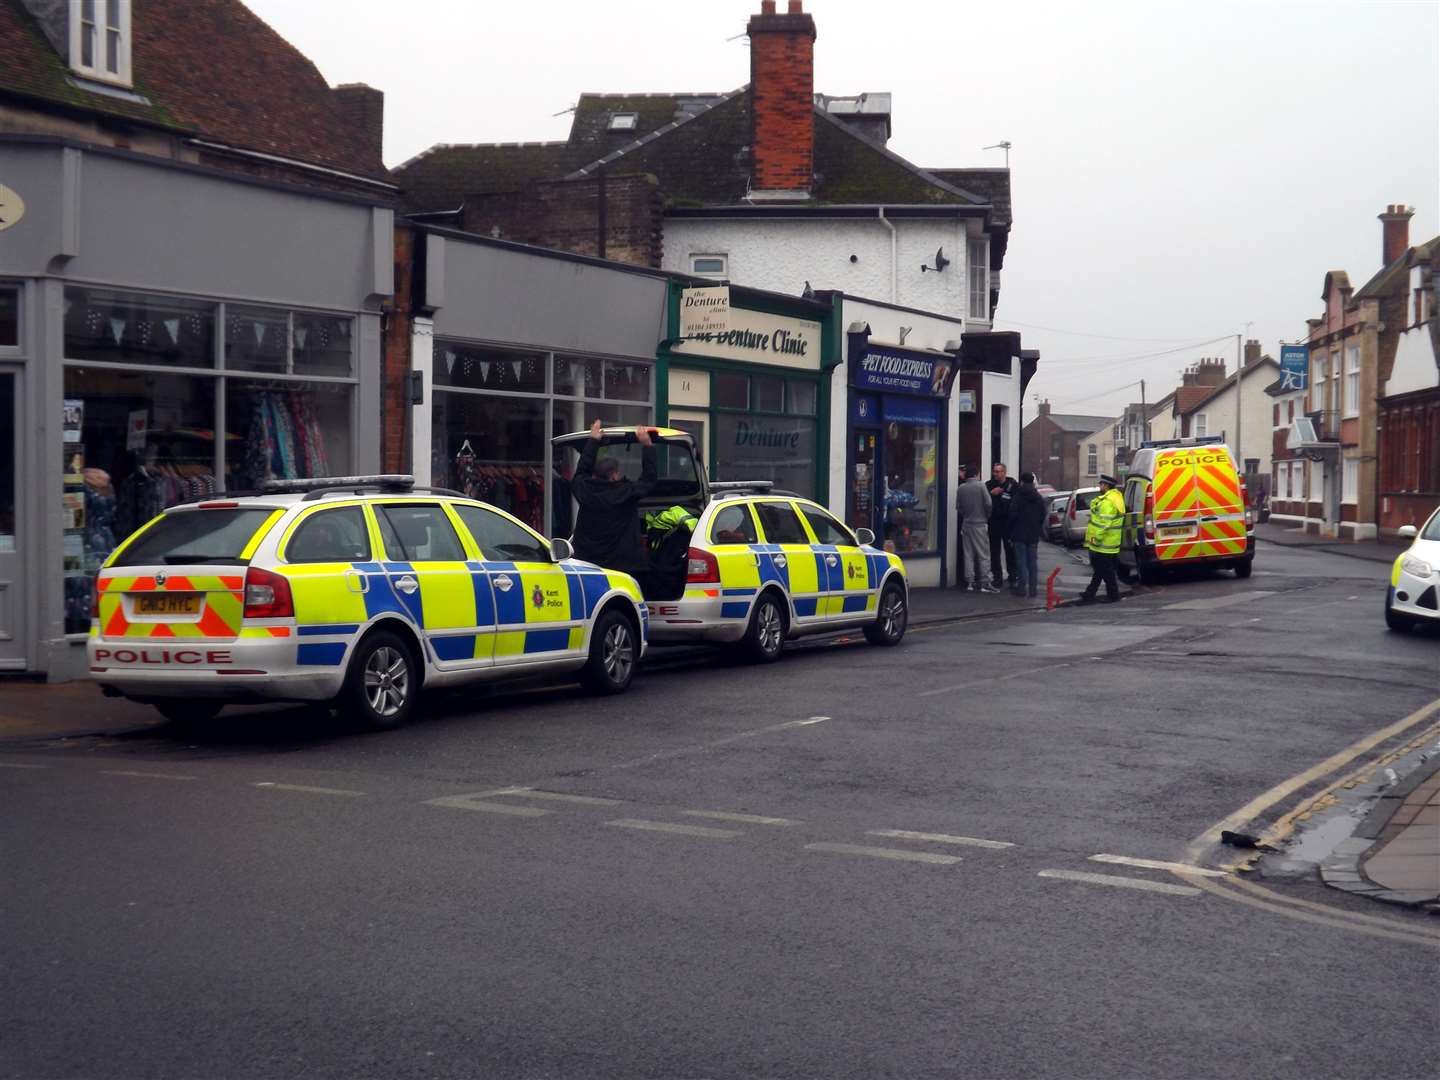 The police presence in Stanhope Road, Deal. Picture: Tony Friend